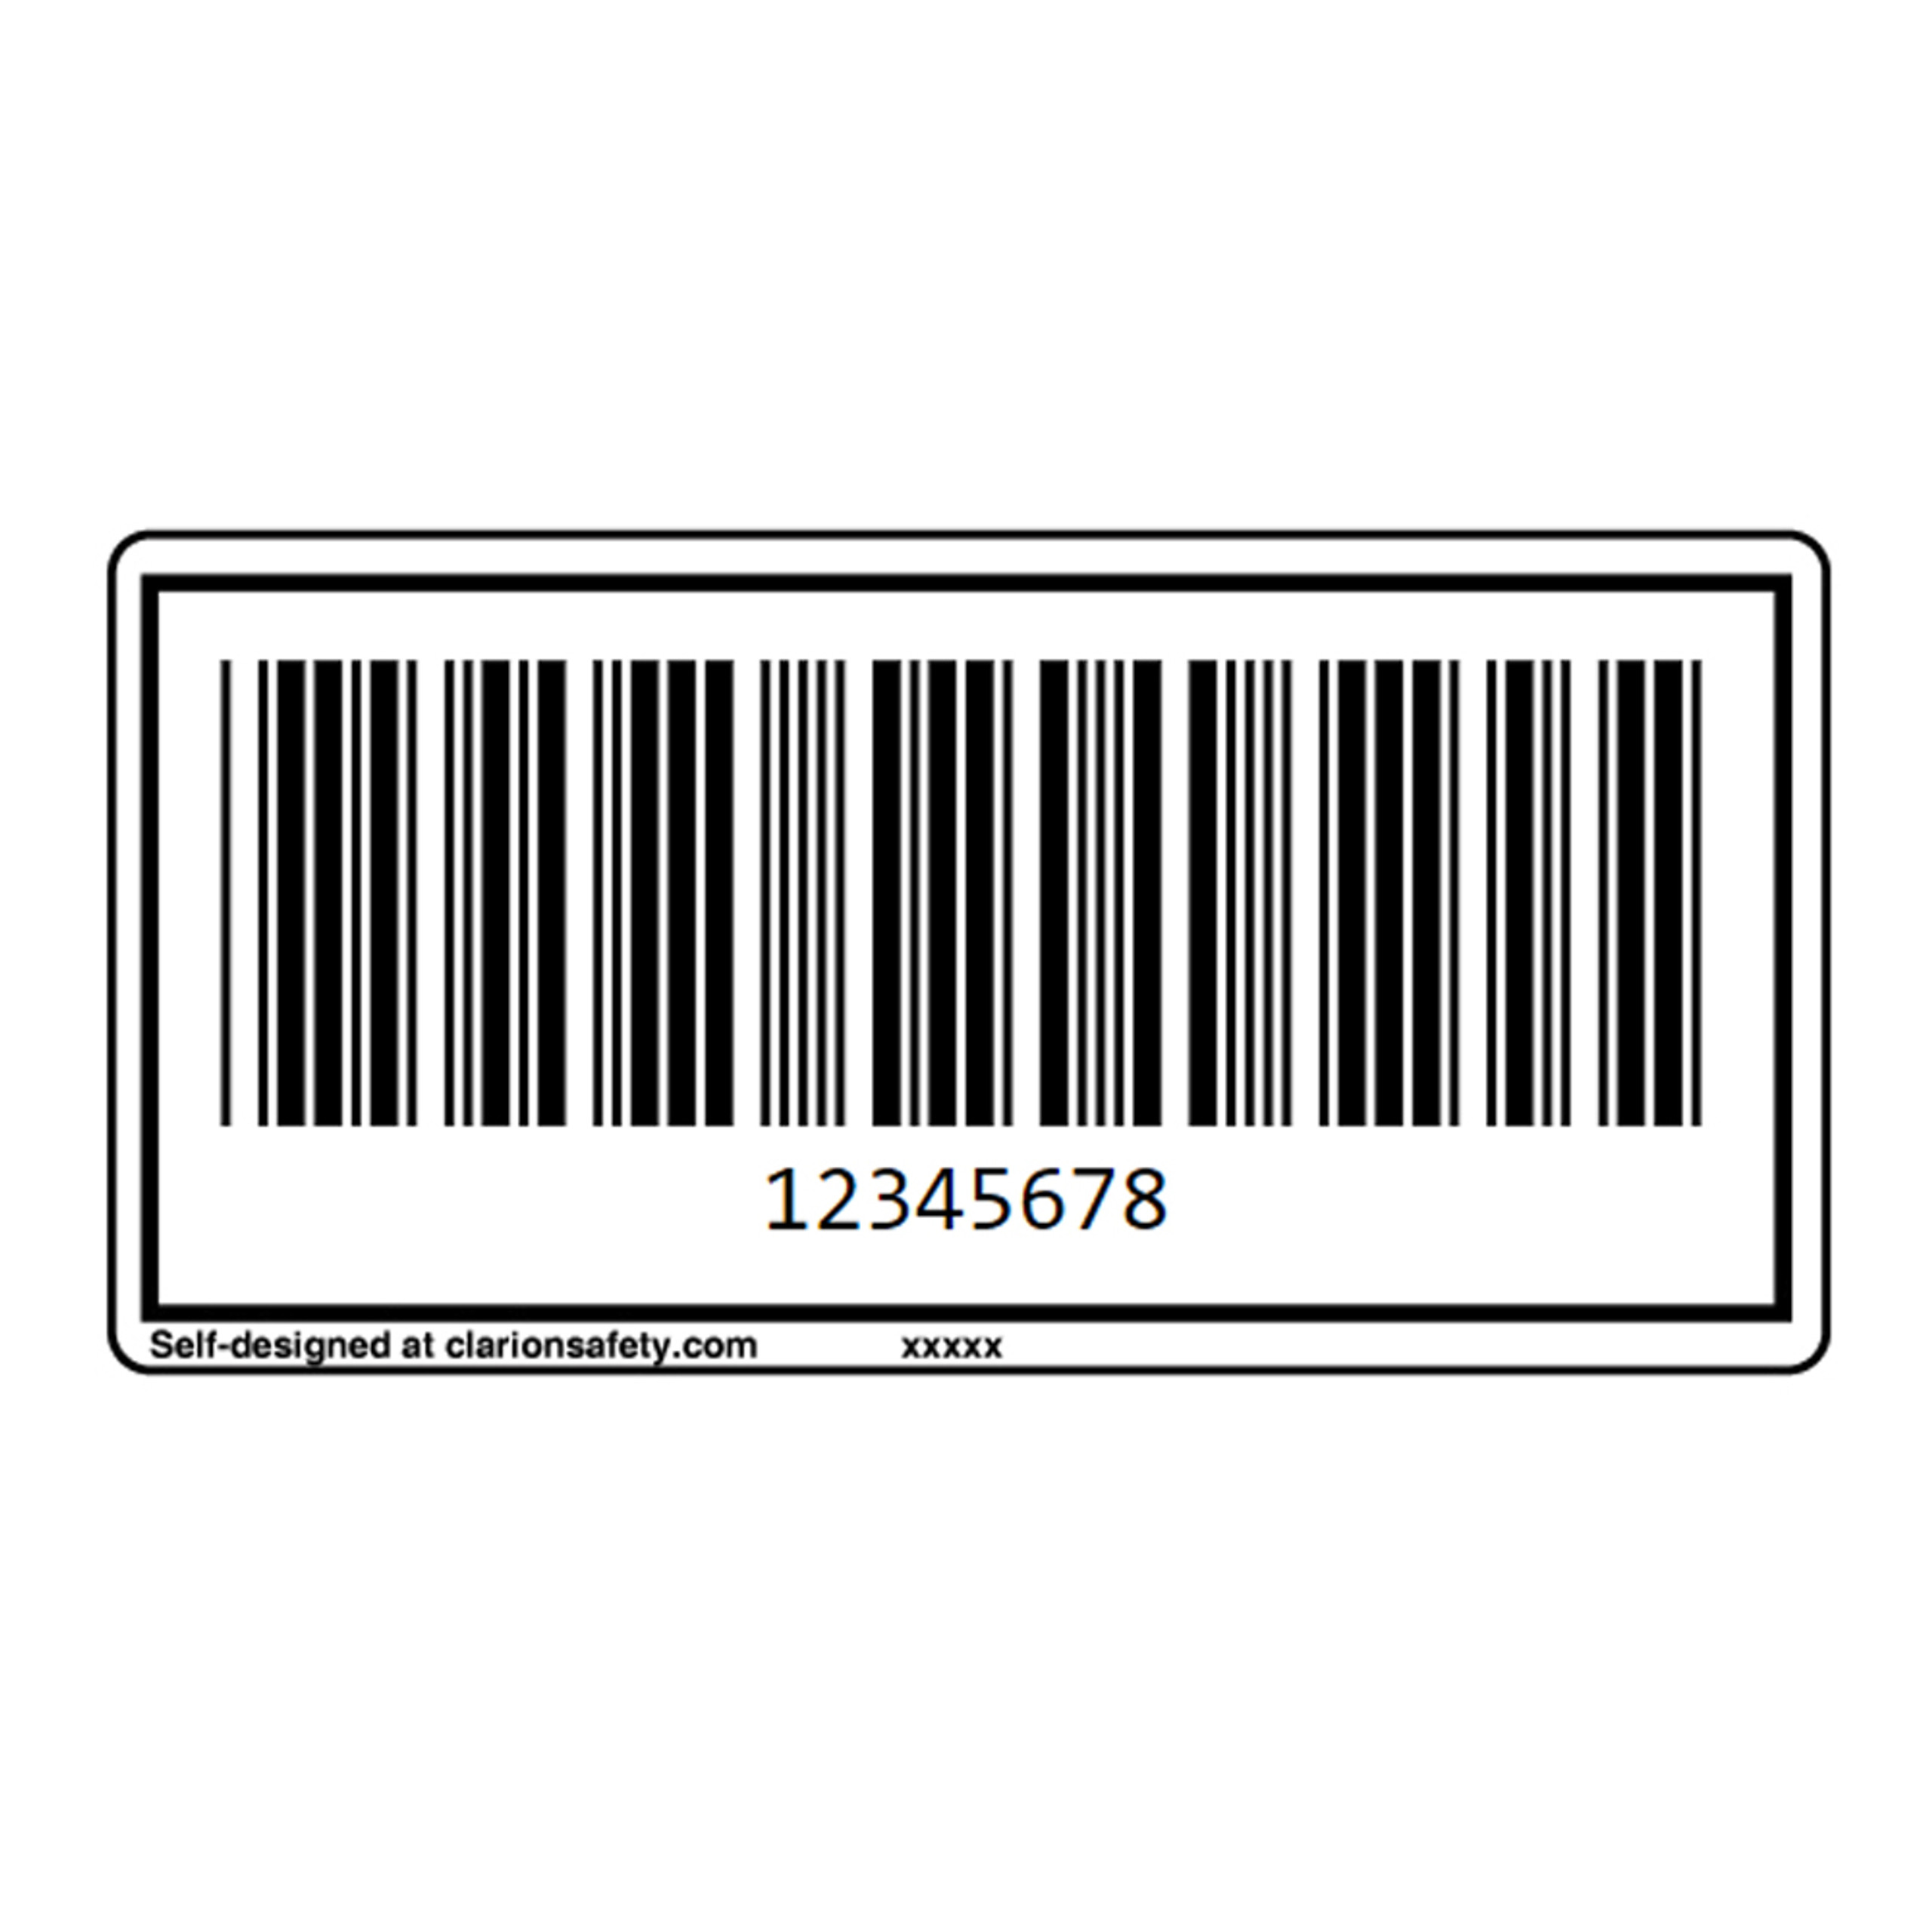 make-a-unique-ean-13-gtin-barcode-label-clarion-safety-systems